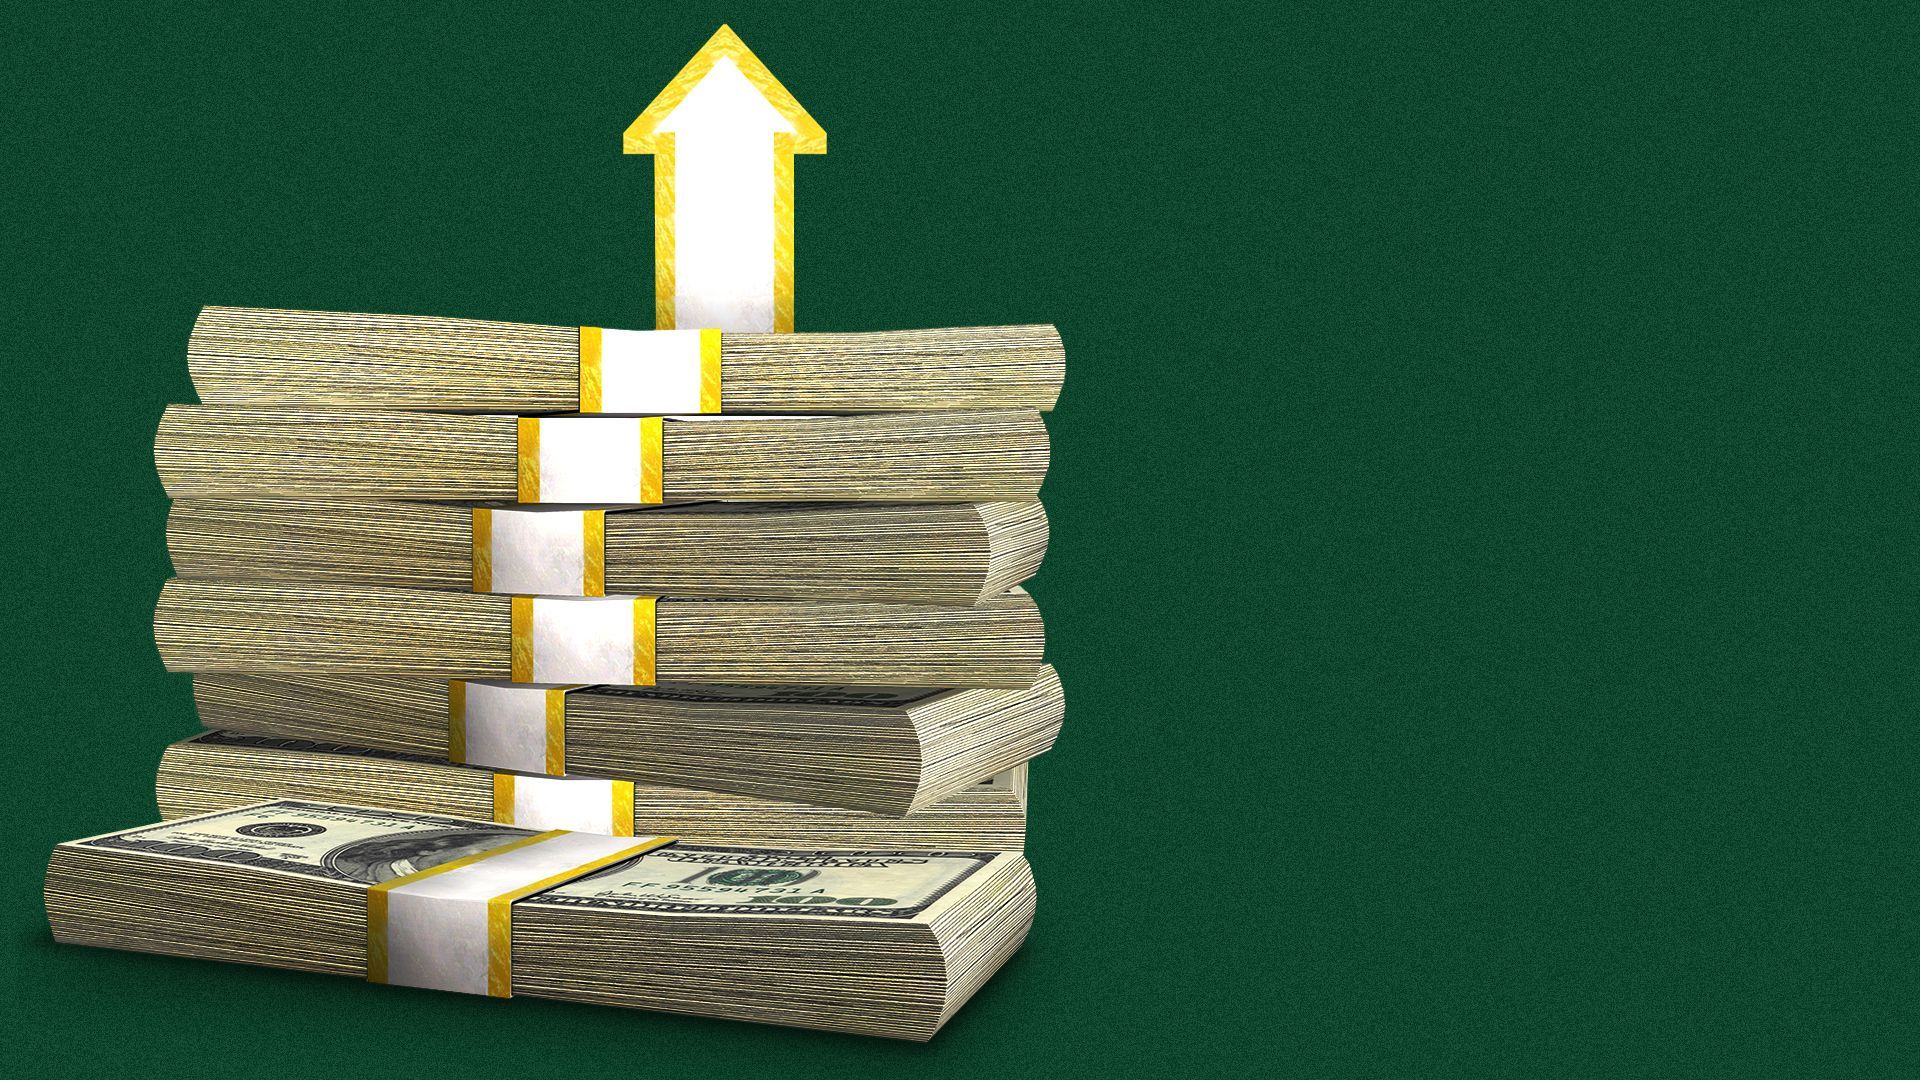 Illustration of stacks of money with a strap that travels upward and forms an upward pointing arrow